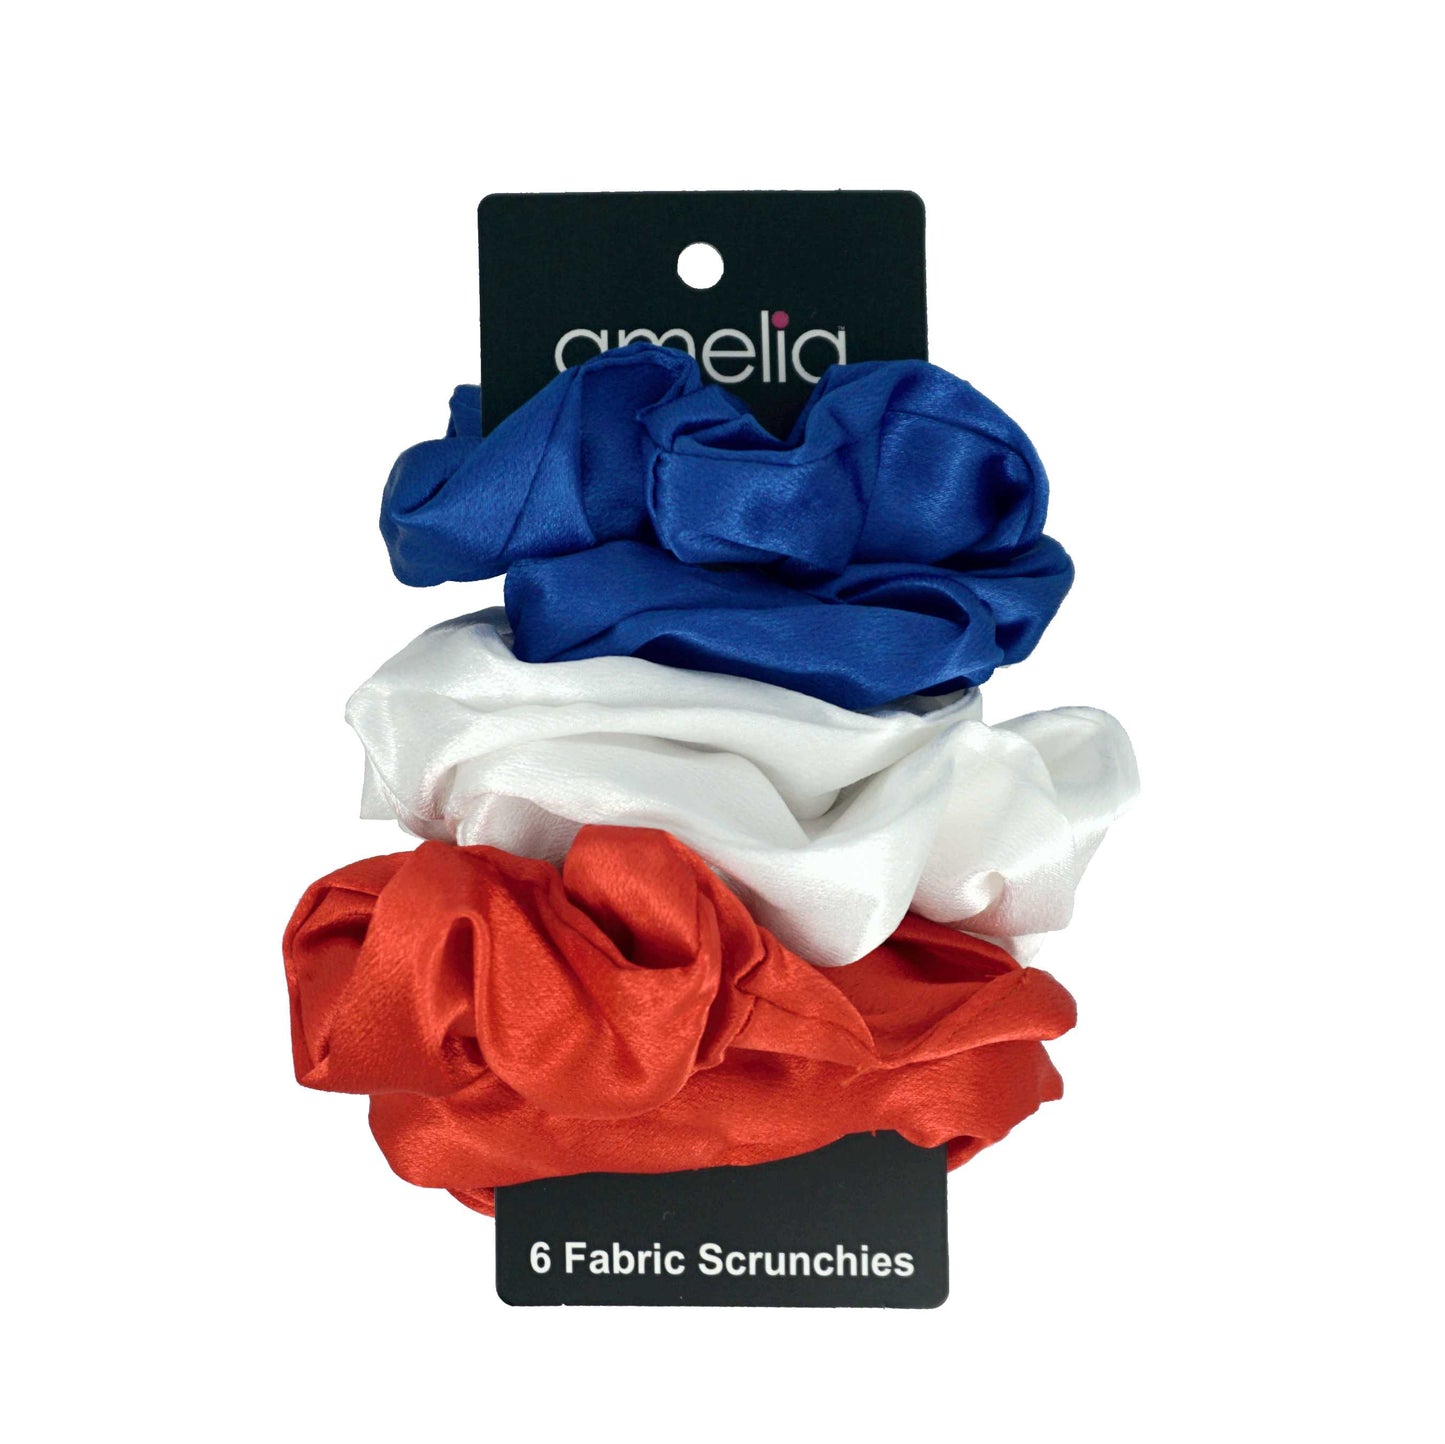 Amelia Beauty, Red, White and Blue Imitation Silk Scrunchies, 4.5in Diameter, Gentle on Hair, Strong Hold, No Snag, No Dents or Creases. 6 Pack